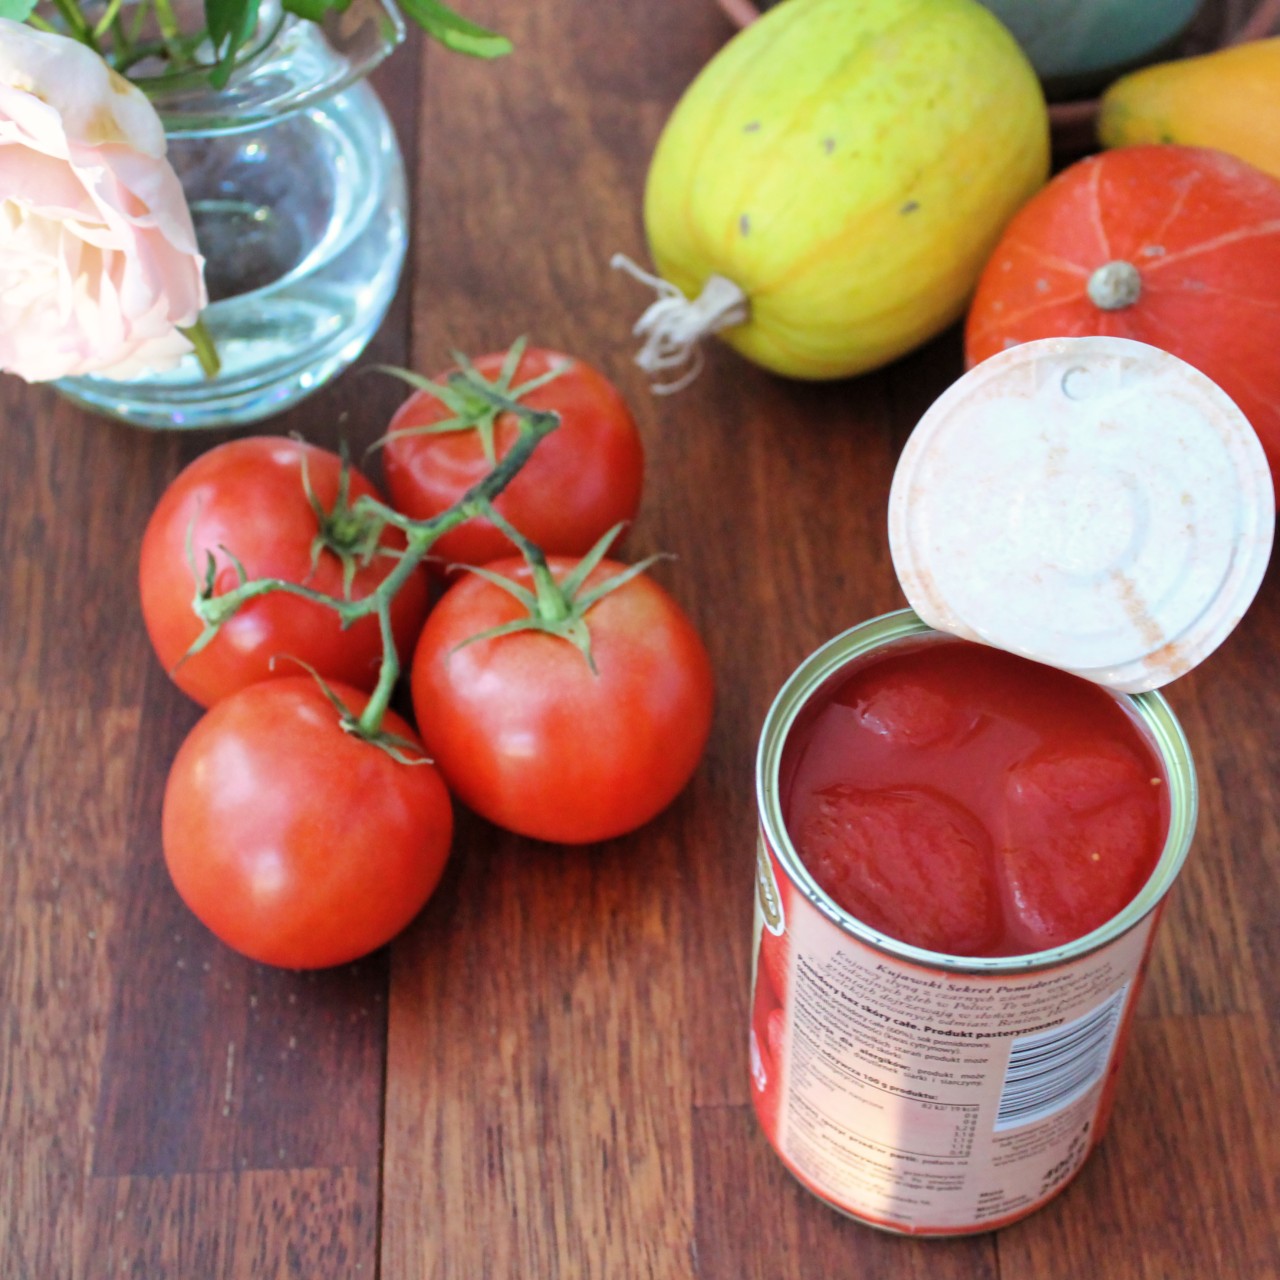 How To Make Tomato Sauce
Do you know how easy it is to make tomato sauce at home? Please check Tastes of Health, find out and enjoy :)